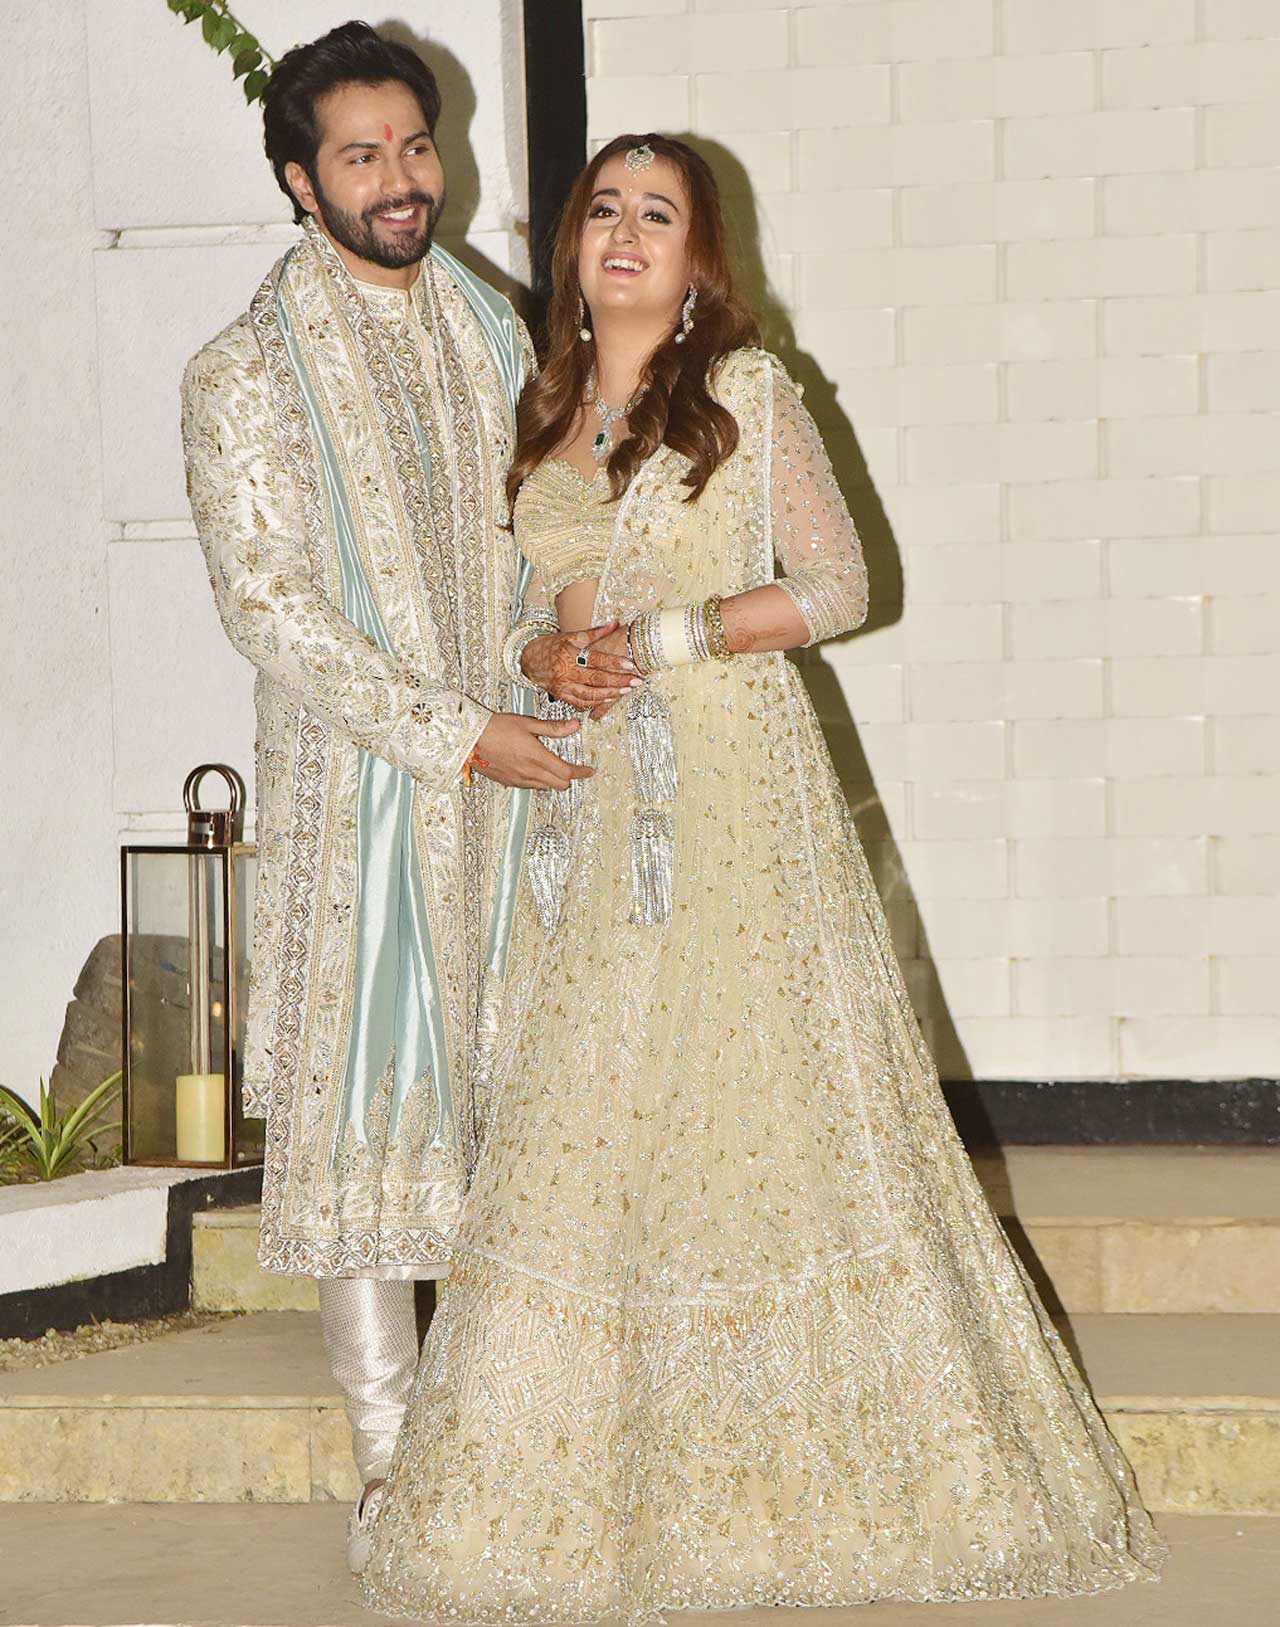 The newlyweds also sent out laddoos for the media waiting to click them outside the venue. Celebrations had started at the wedding venue, The Mansion House, in Alibaug on January 22 with the wedding taking place on Sunday.